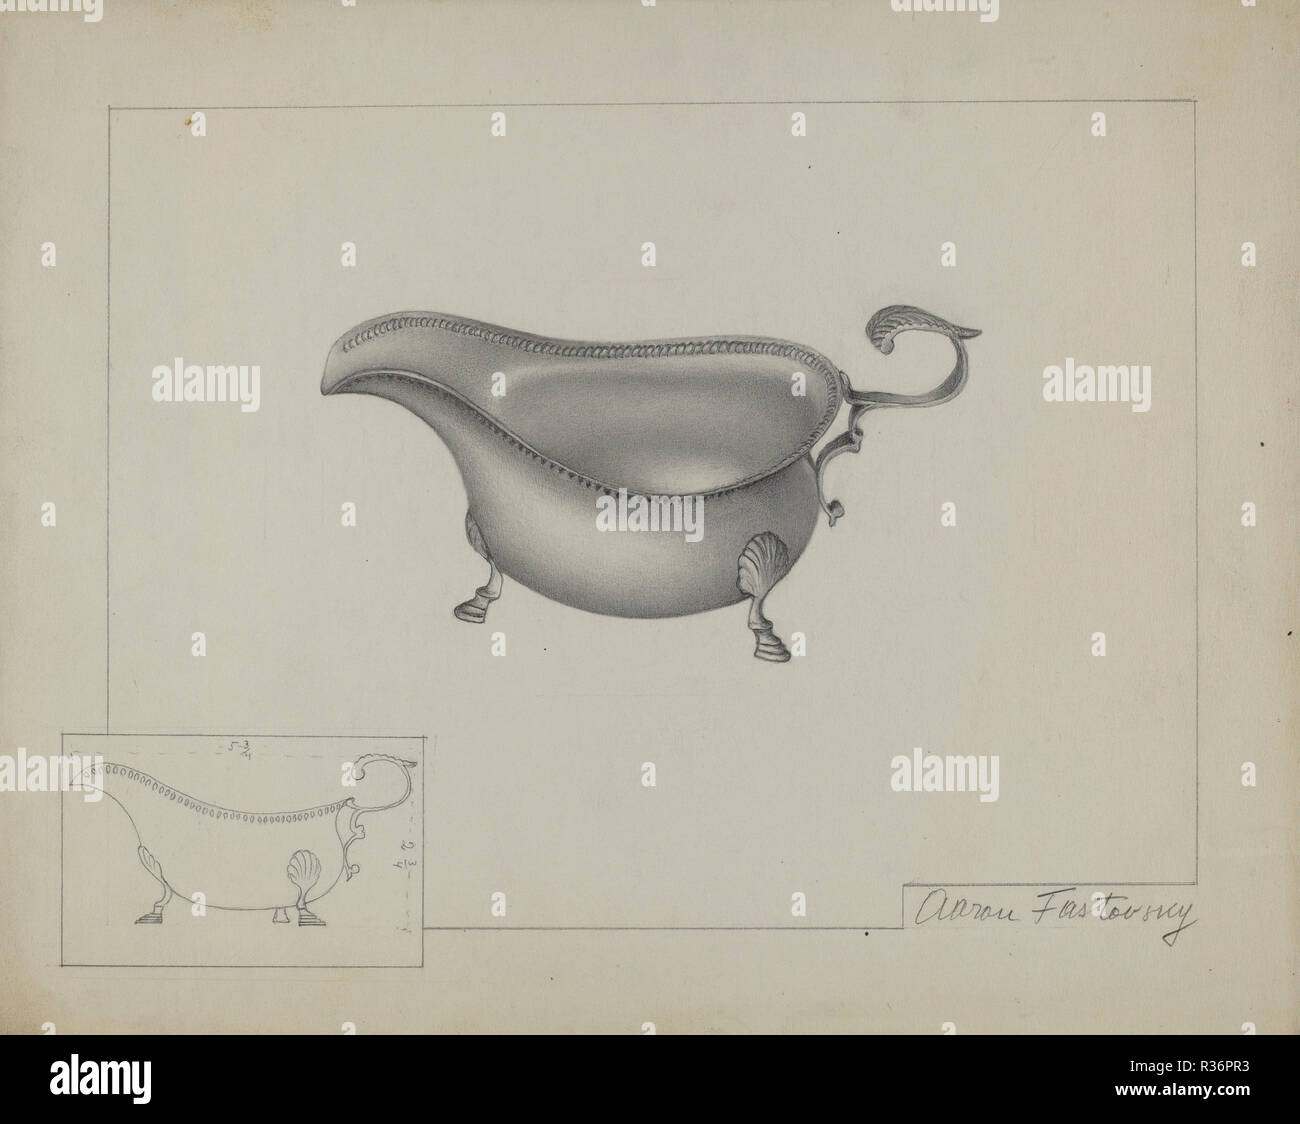 Silver Sauce Boat. Dated: c. 1937. Dimensions: overall: 22.9 x 28.9 cm (9 x 11 3/8 in.)  Original IAD Object: 2 3/4' high; 5 11/16' wide. Medium: graphite on paper. Museum: National Gallery of Art, Washington DC. Author: Aaron Fastovsky. Stock Photo